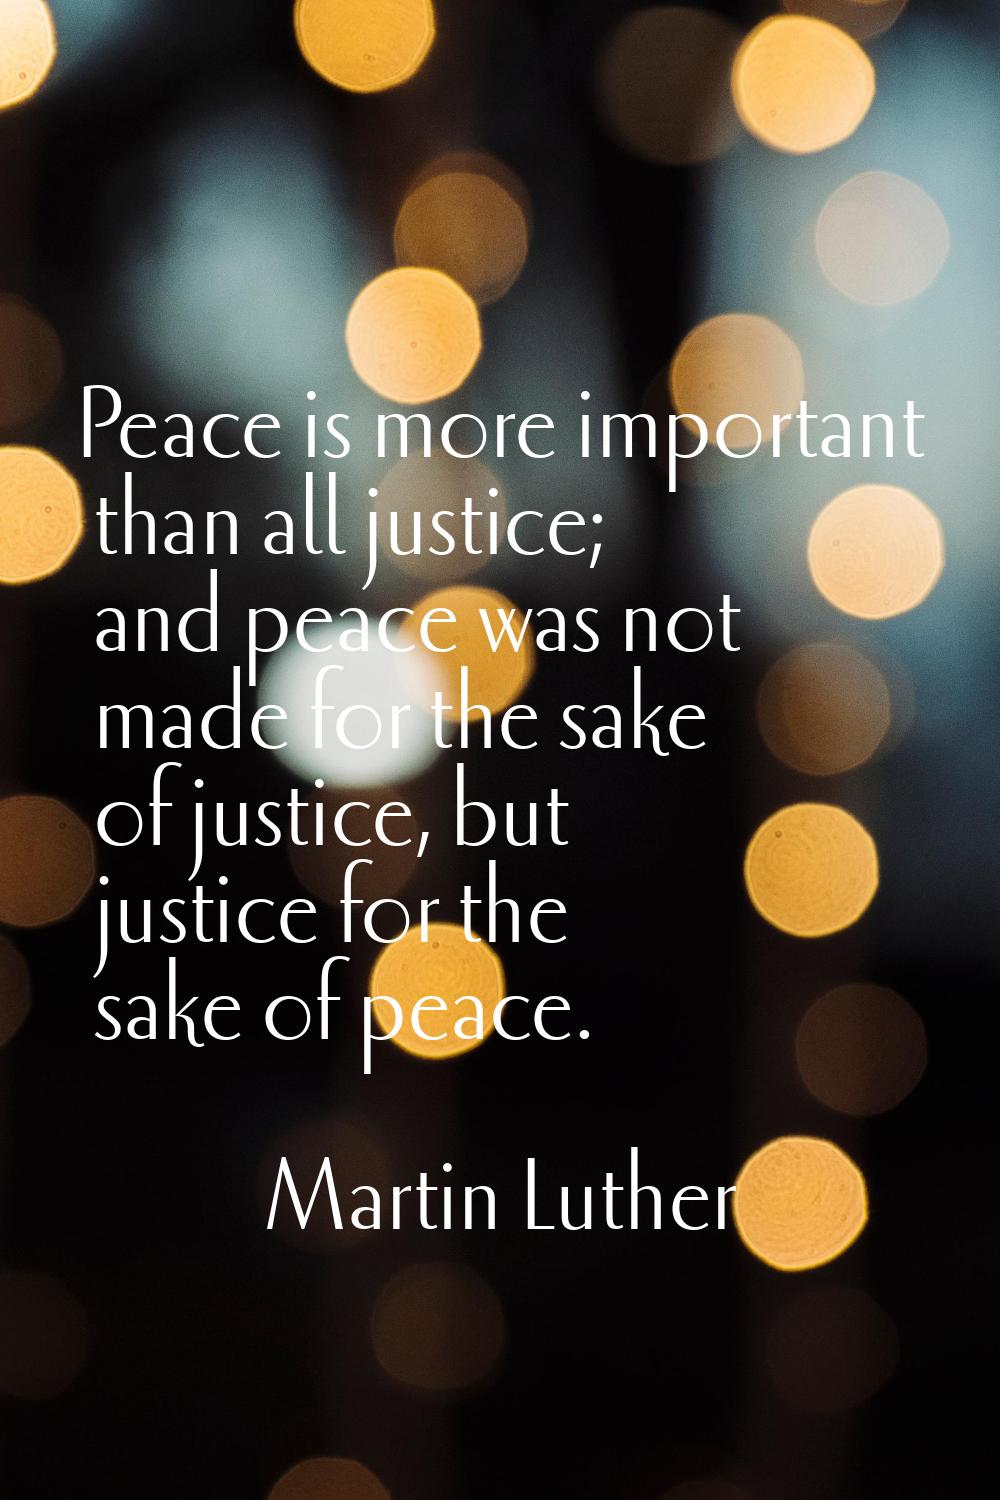 Peace is more important than all justice; and peace was not made for the sake of justice, but justi